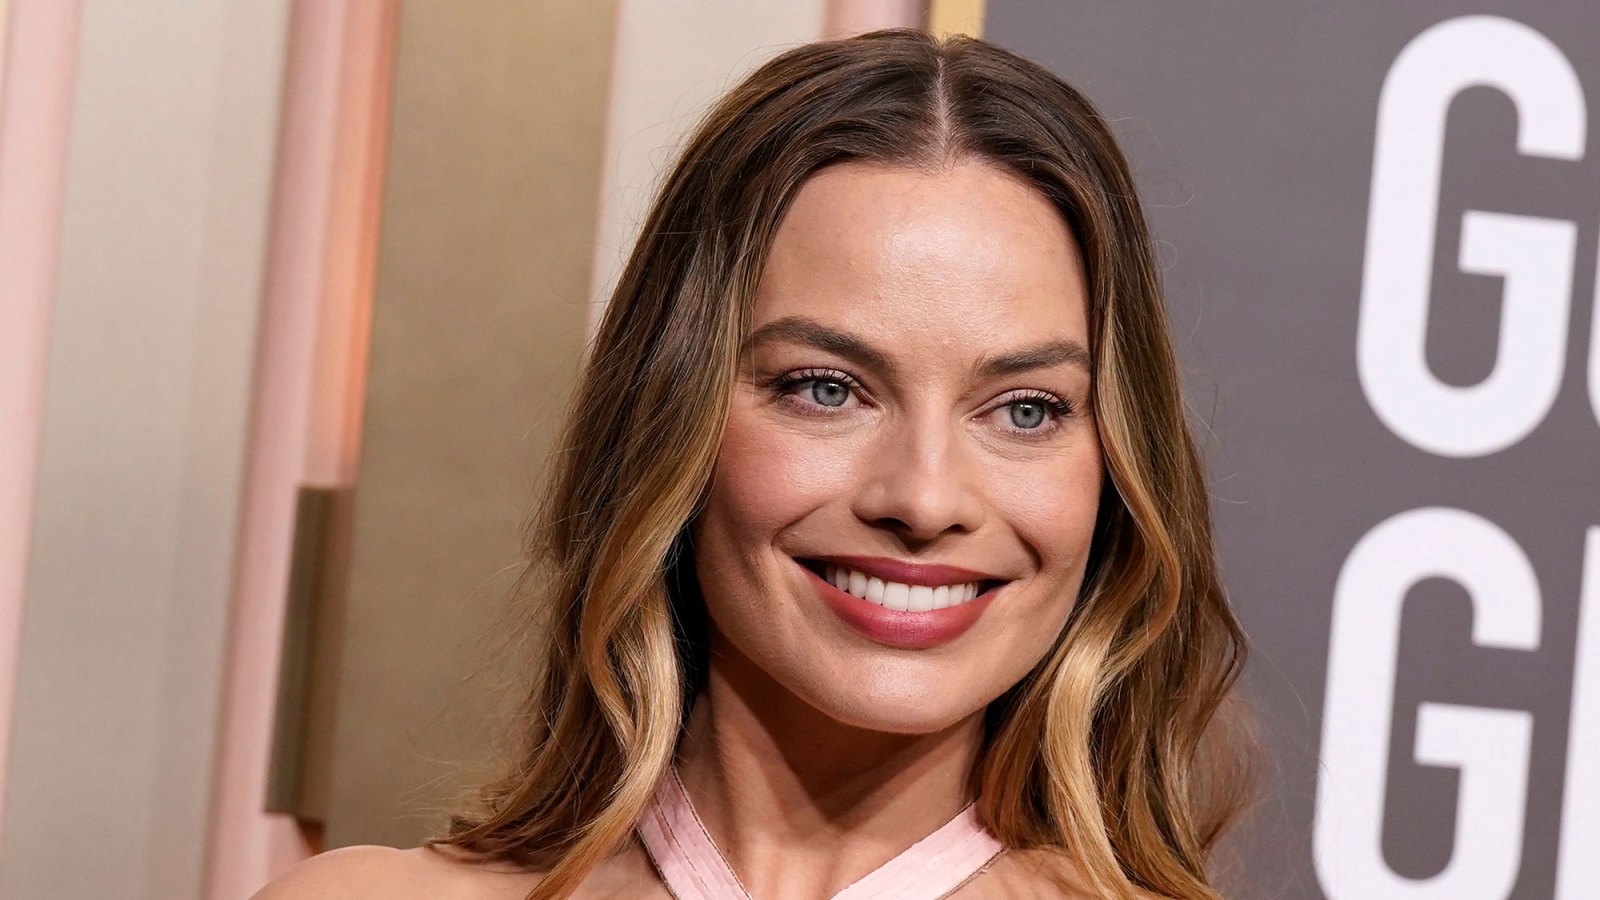 Margot Robbie Prepped for the Golden Globes With This Serum